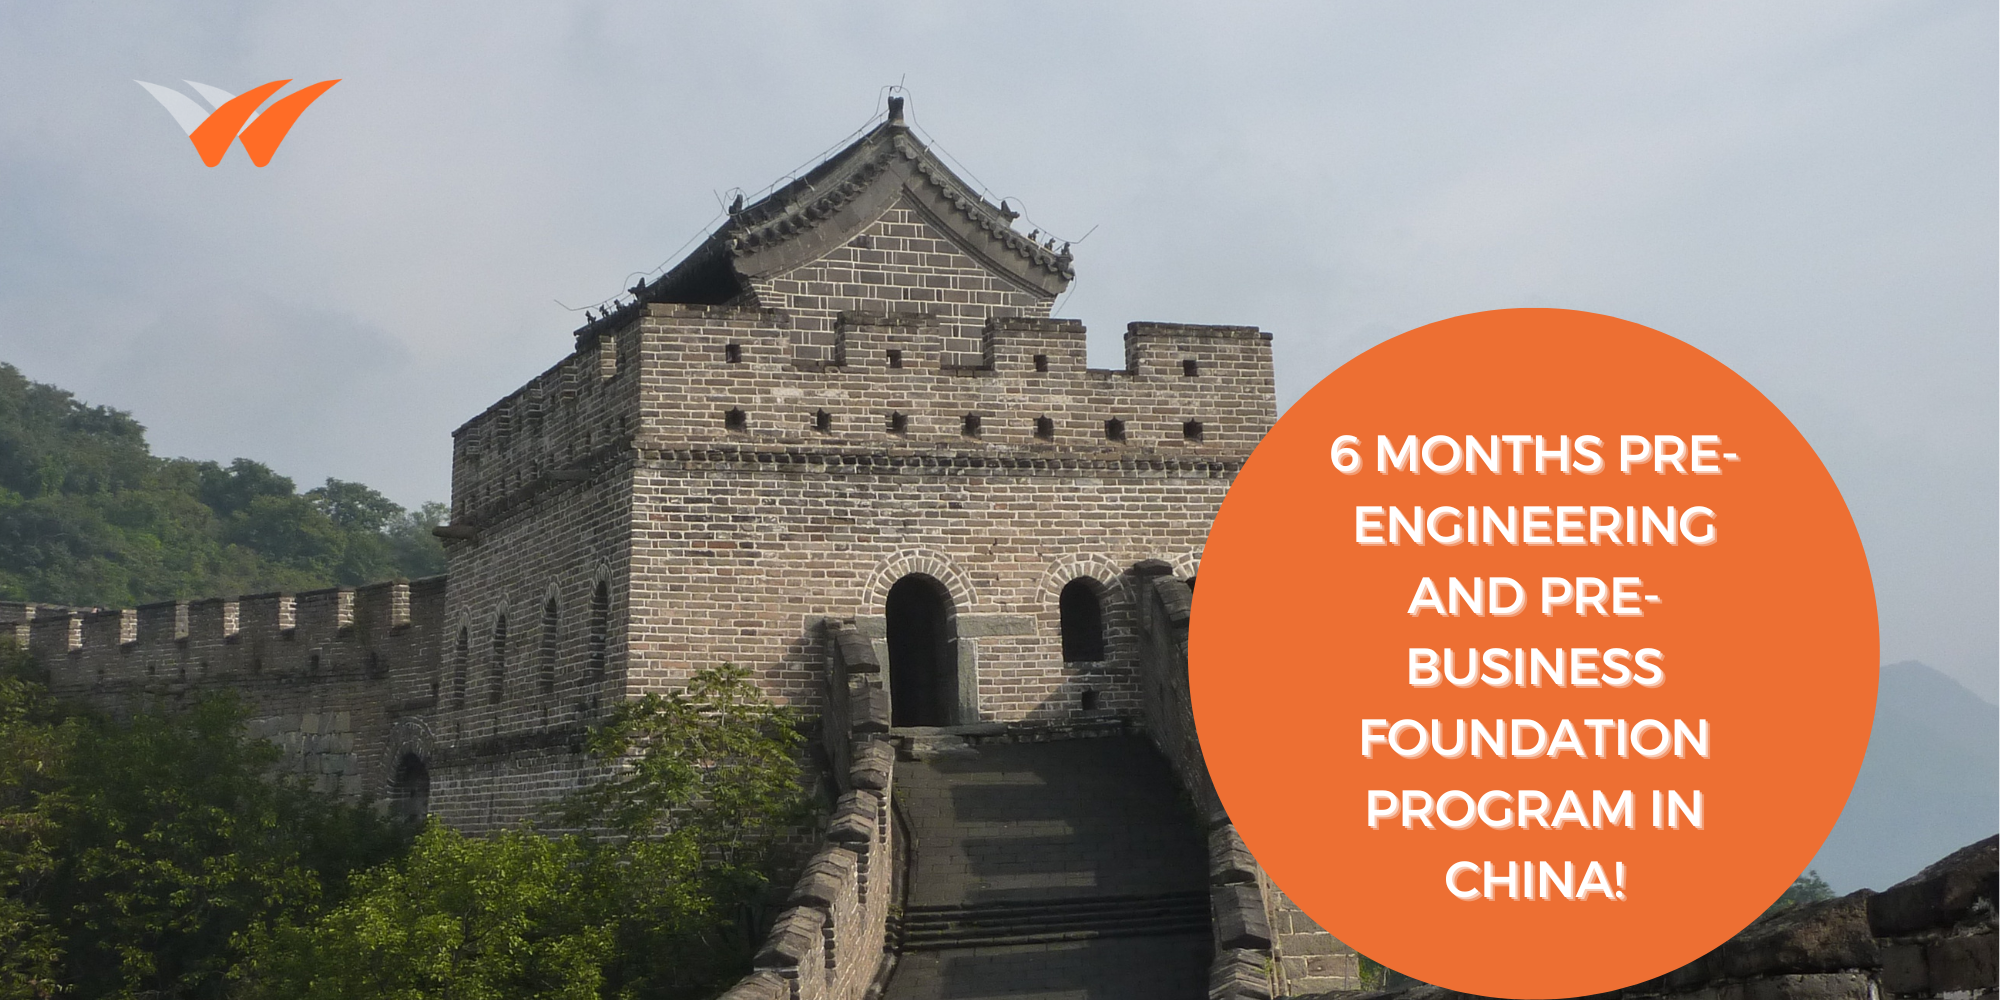 6 Months Pre-Engineering and Pre-Business Foundation Program in China!